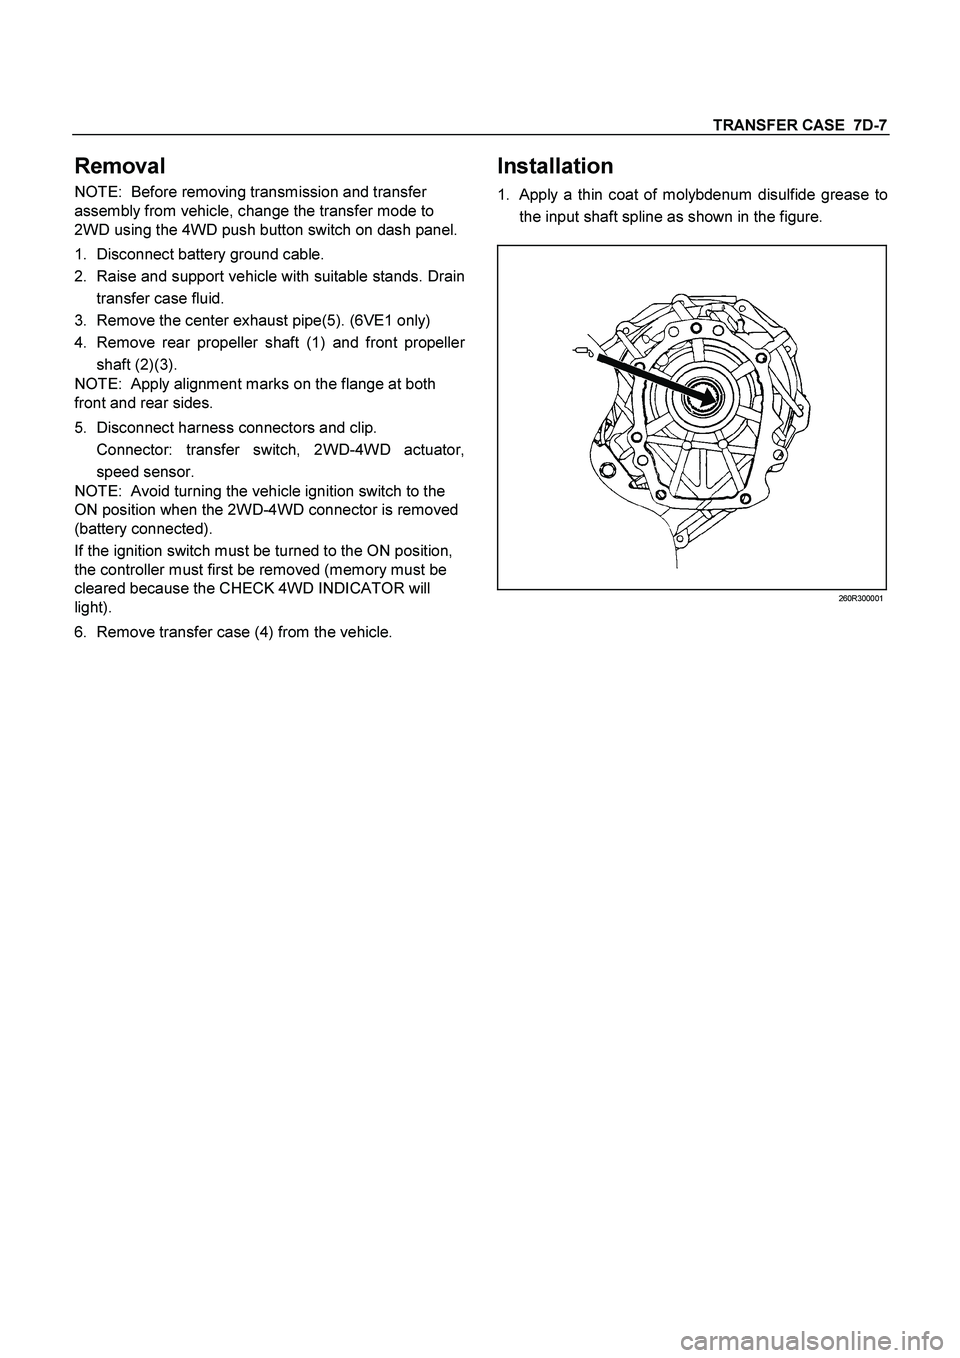 ISUZU TF SERIES 2004  Workshop Manual TRANSFER CASE  7D-7
 
Removal 
NOTE:  Before removing transmission and transfer 
assembly from vehicle, change the transfer mode to 
2WD using the 4WD push button switch on dash panel.
1. 
Disconnect 